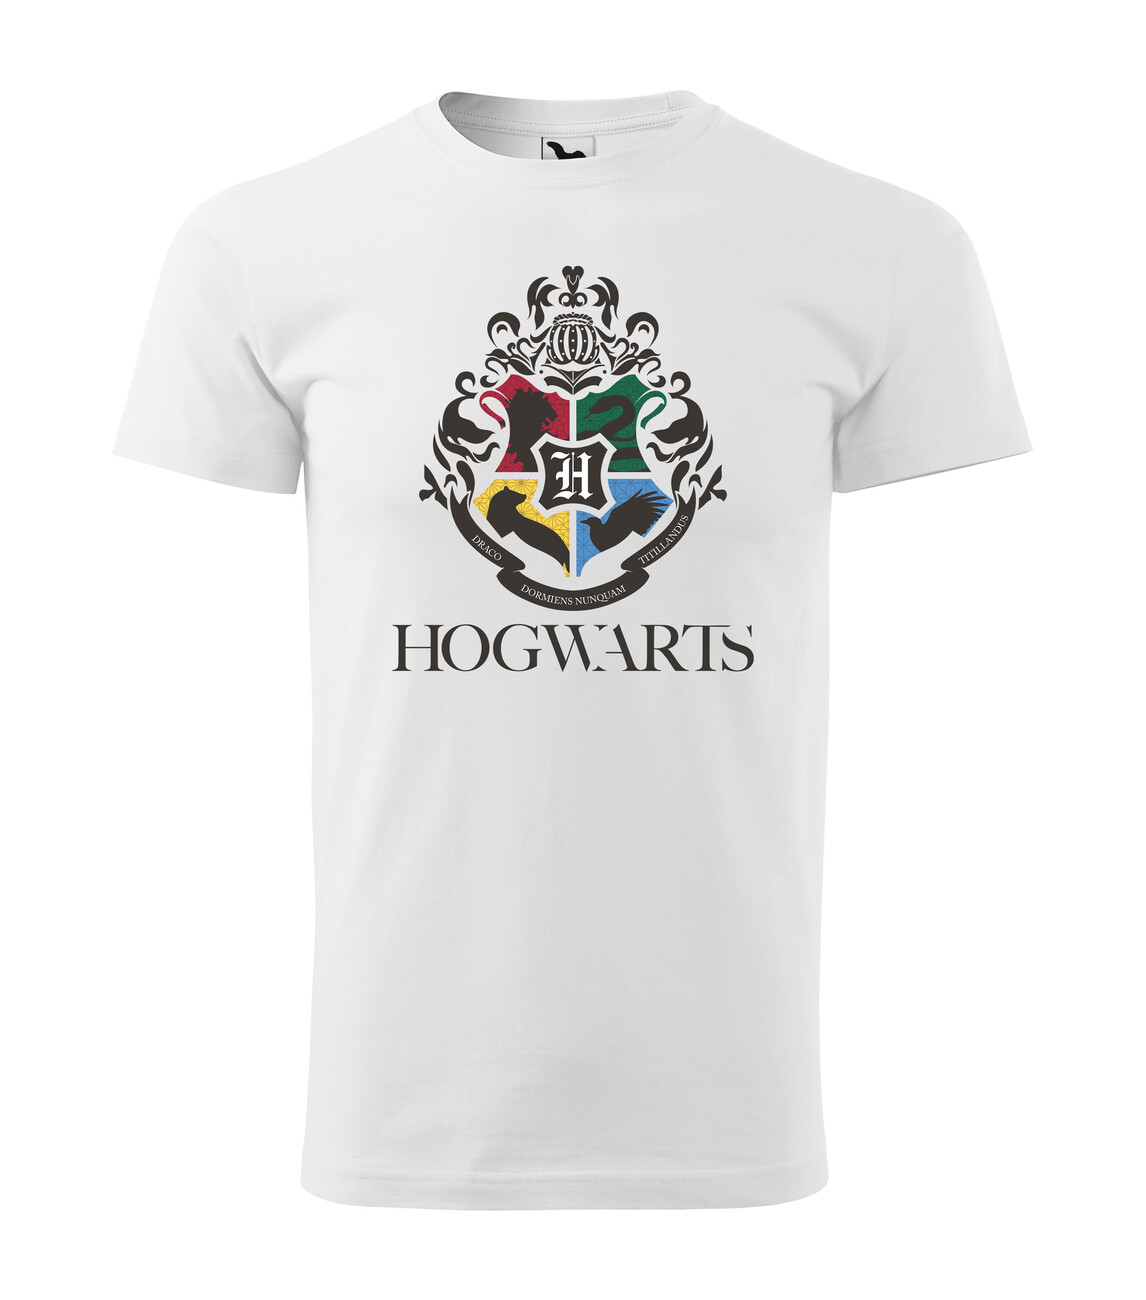 Harry Potter - Logo fans merchandise Hogwarts accessories Clothes and for 